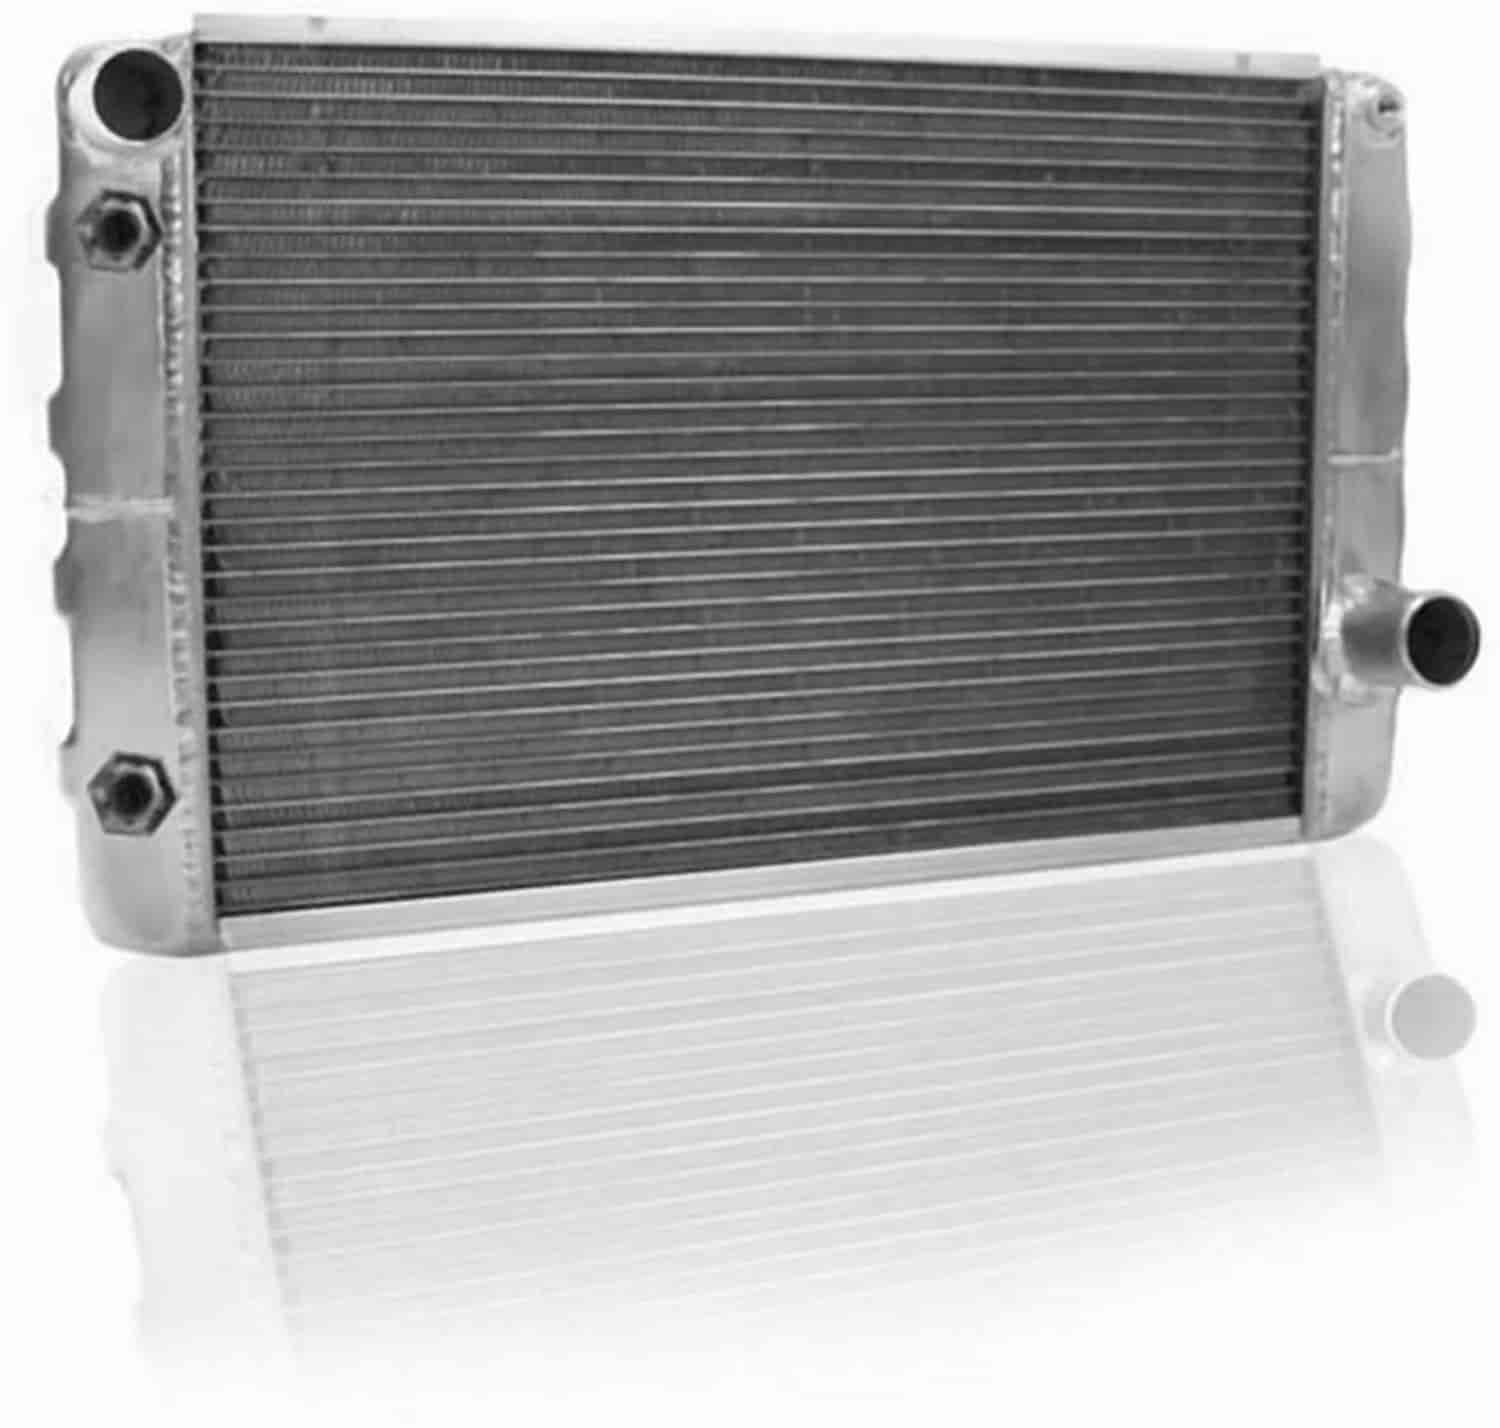 ClassicCool Universal Fit Radiator Single Pass Crossflow Design 26" x 15.50" with Transmission Cooler